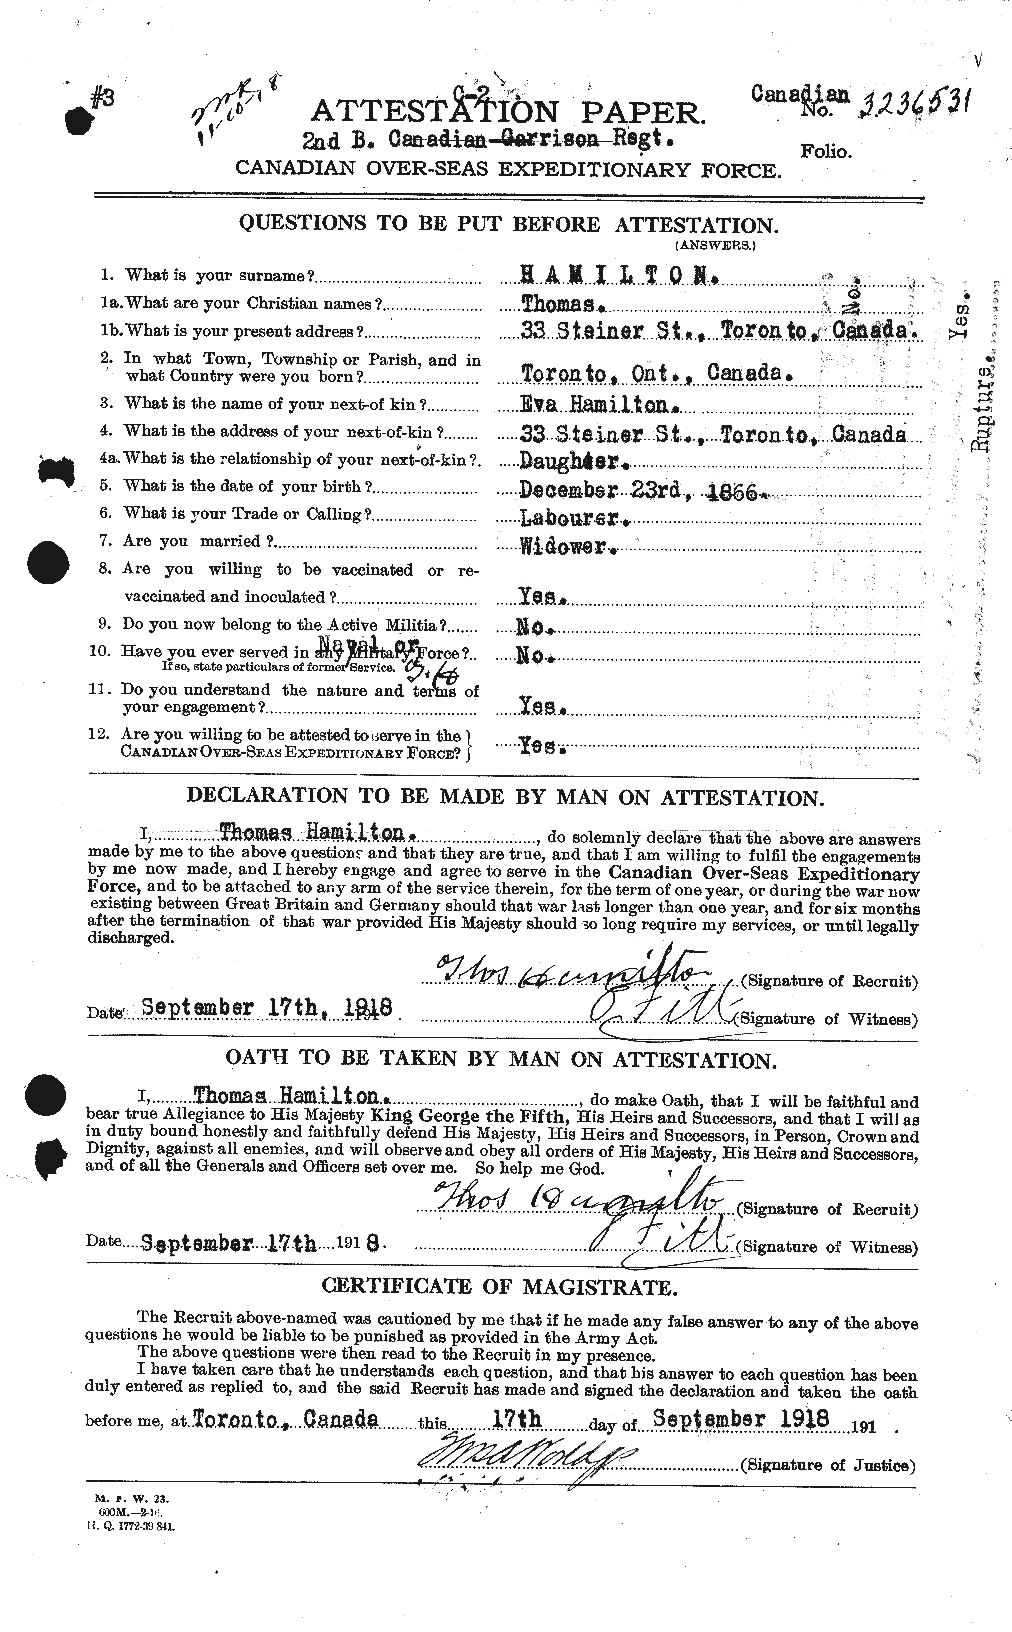 Personnel Records of the First World War - CEF 373334a